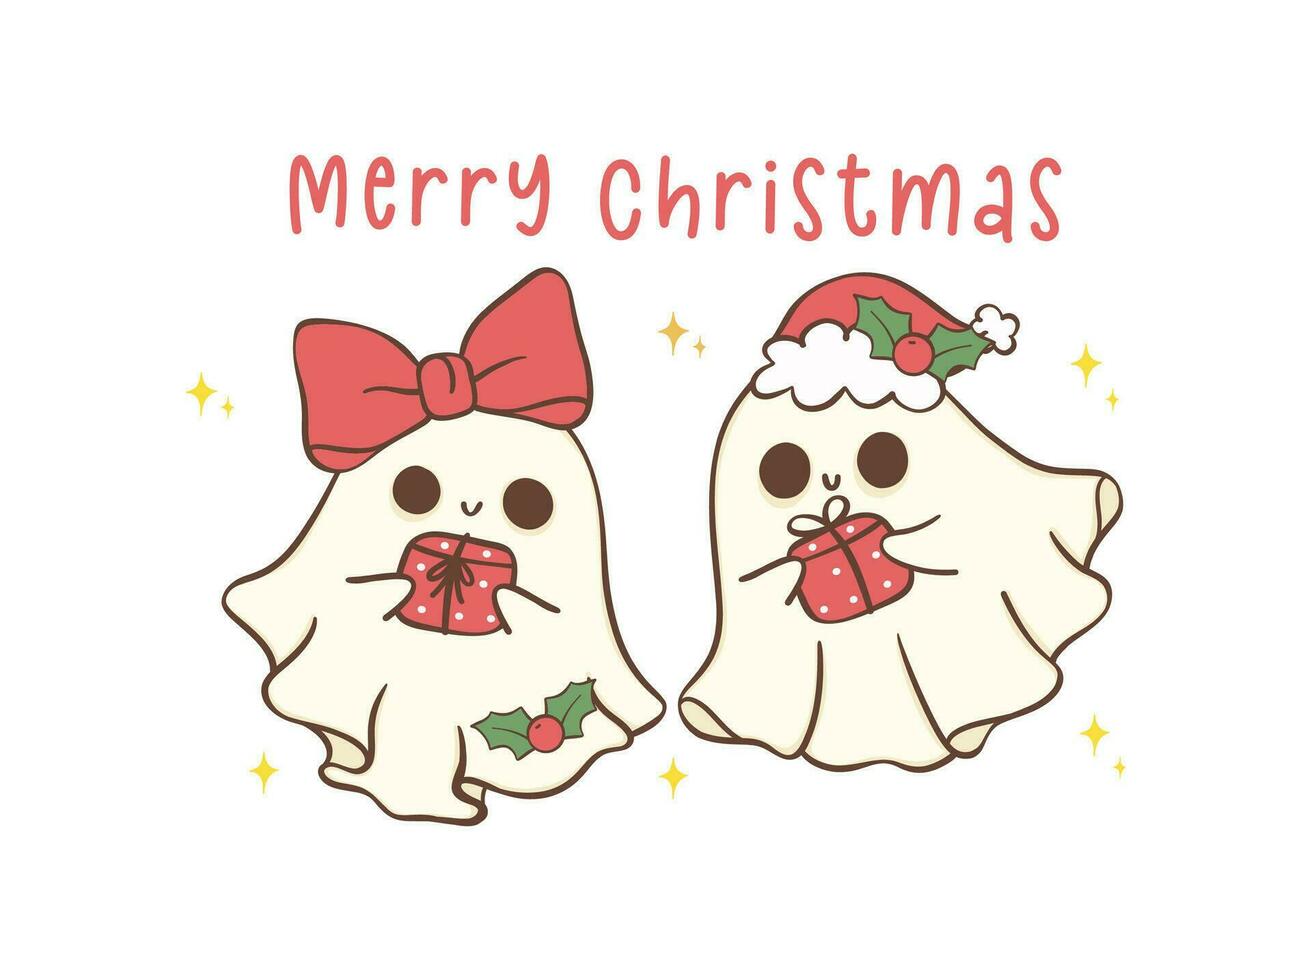 Cute and Kawaii Christmas Ghosts with gifts. Festive greeting card Holiday Cartoon Hand Drawing with adorable pose. vector